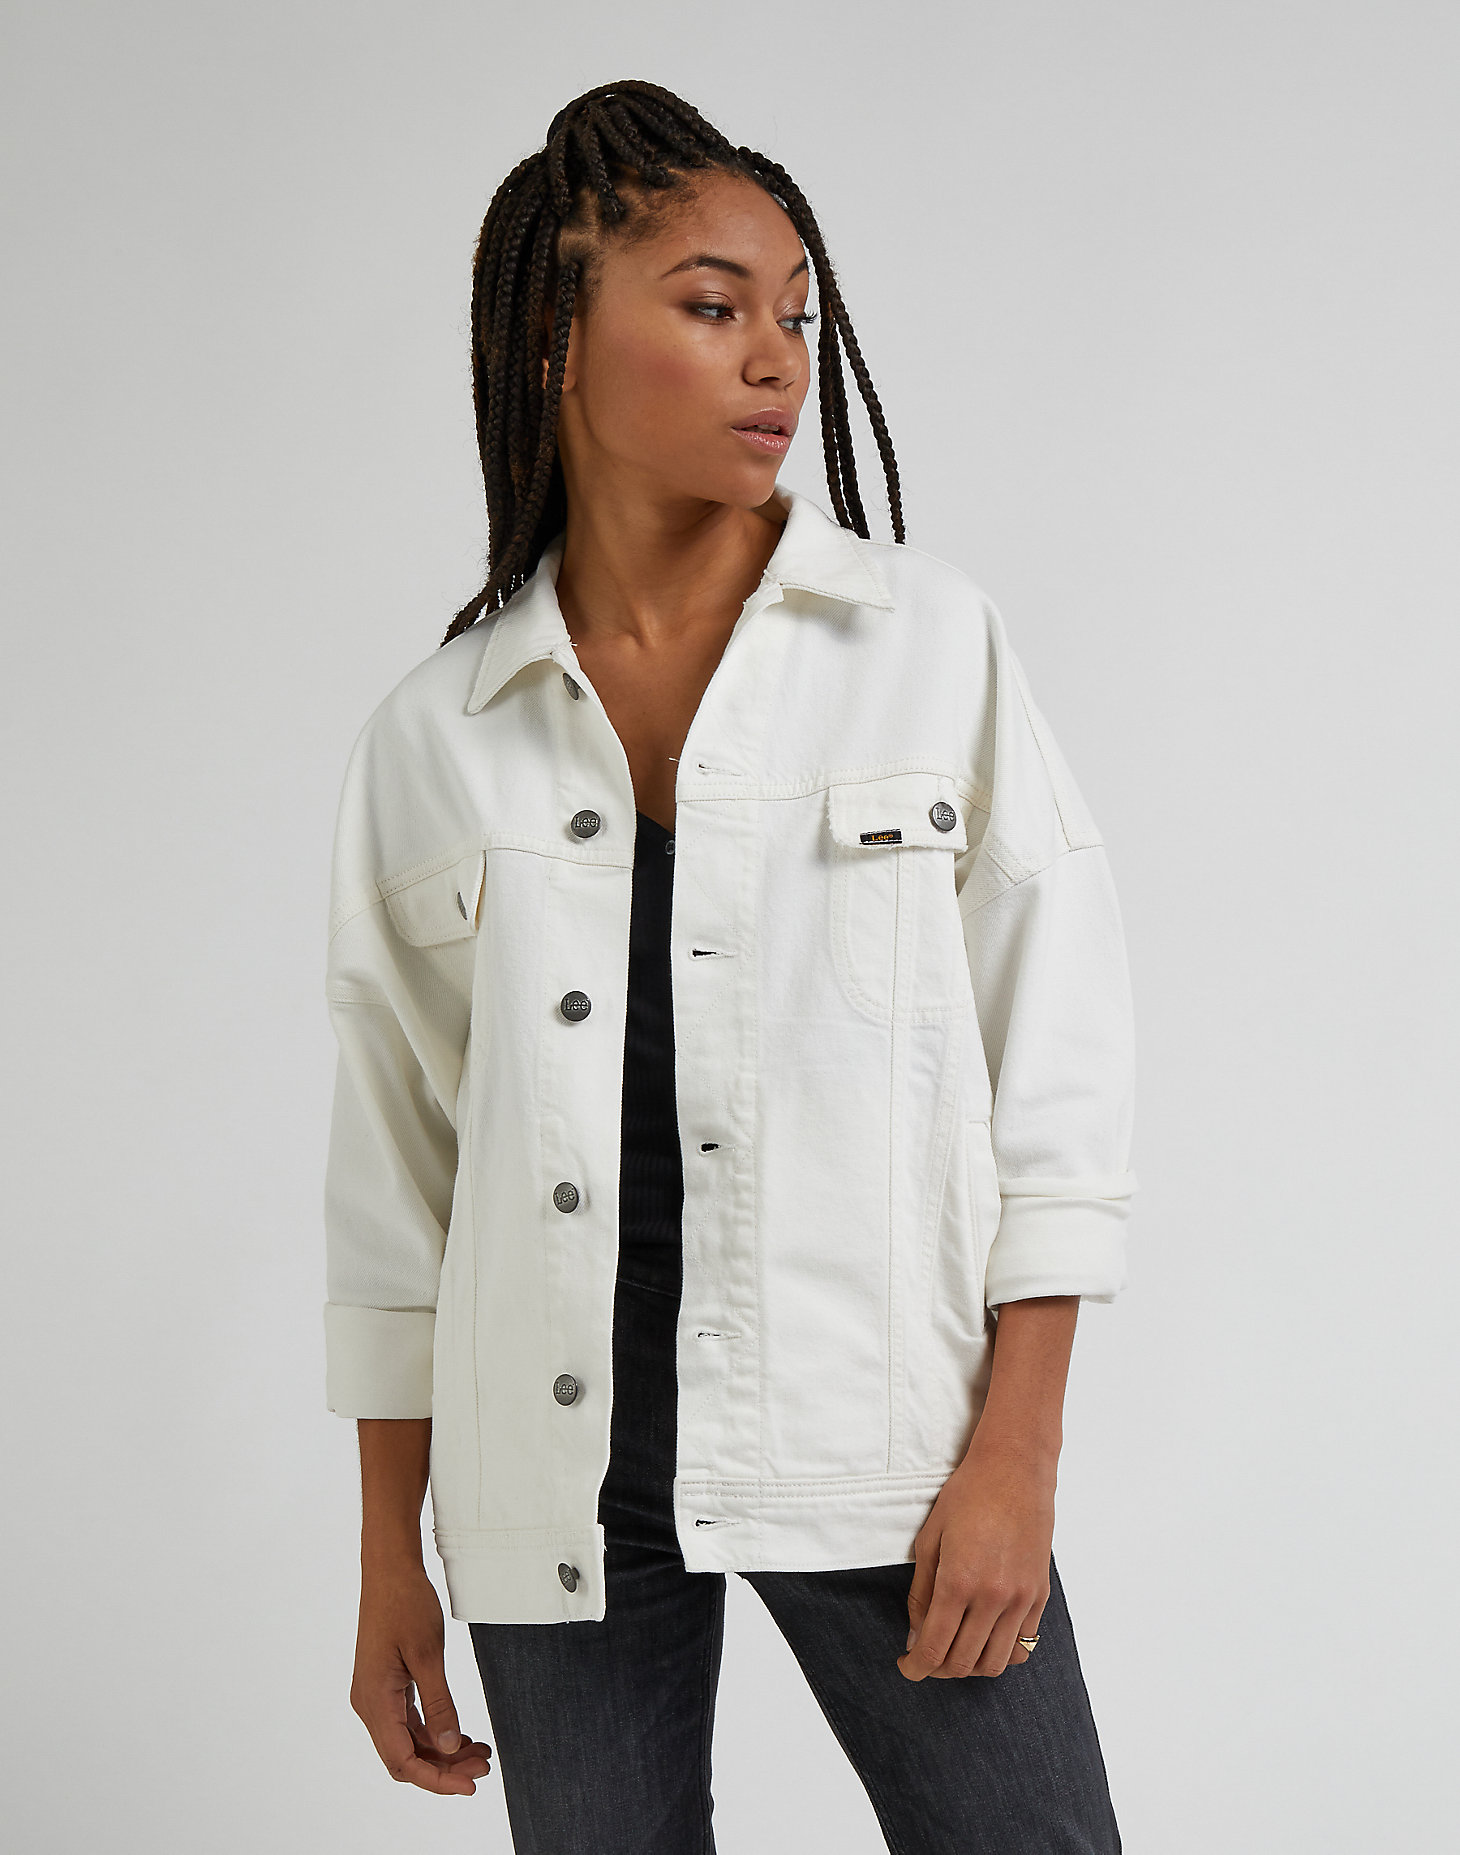 Trucker Jacket in Marble White main view